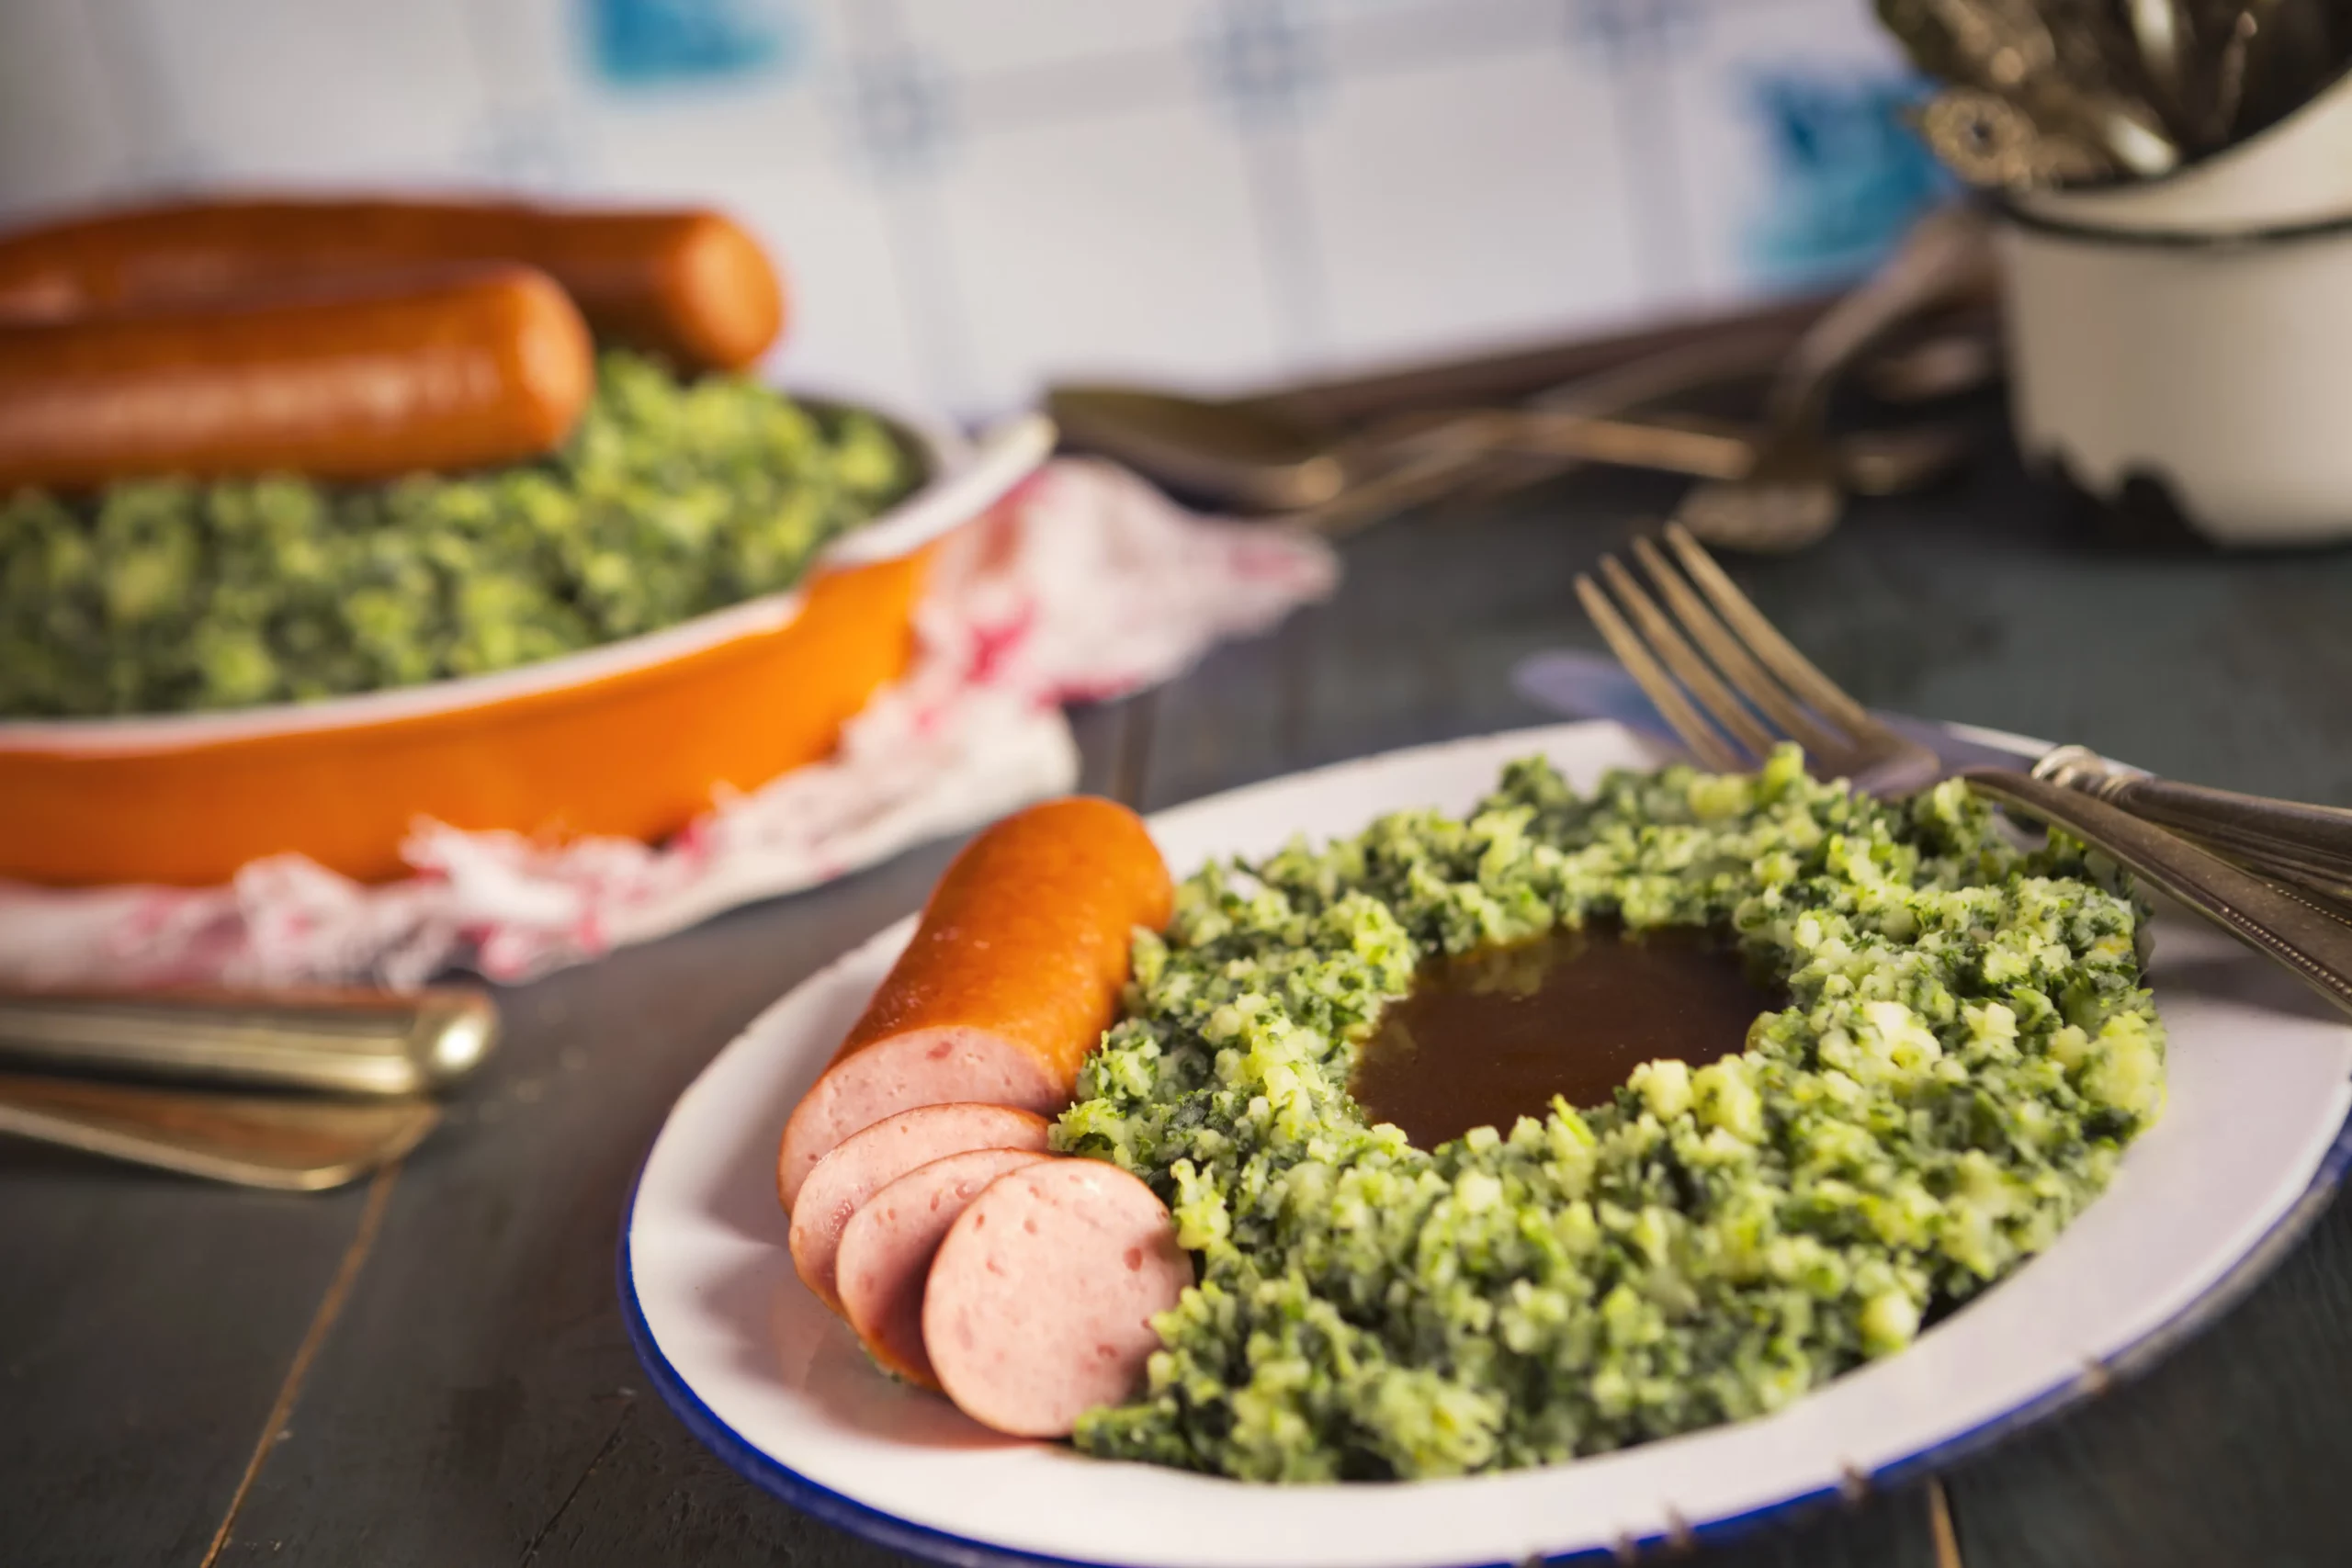 A plate with 'Boerenkool Stamppot' or mashed potato with kale and smoked sausage, a traditional Dutch meal.